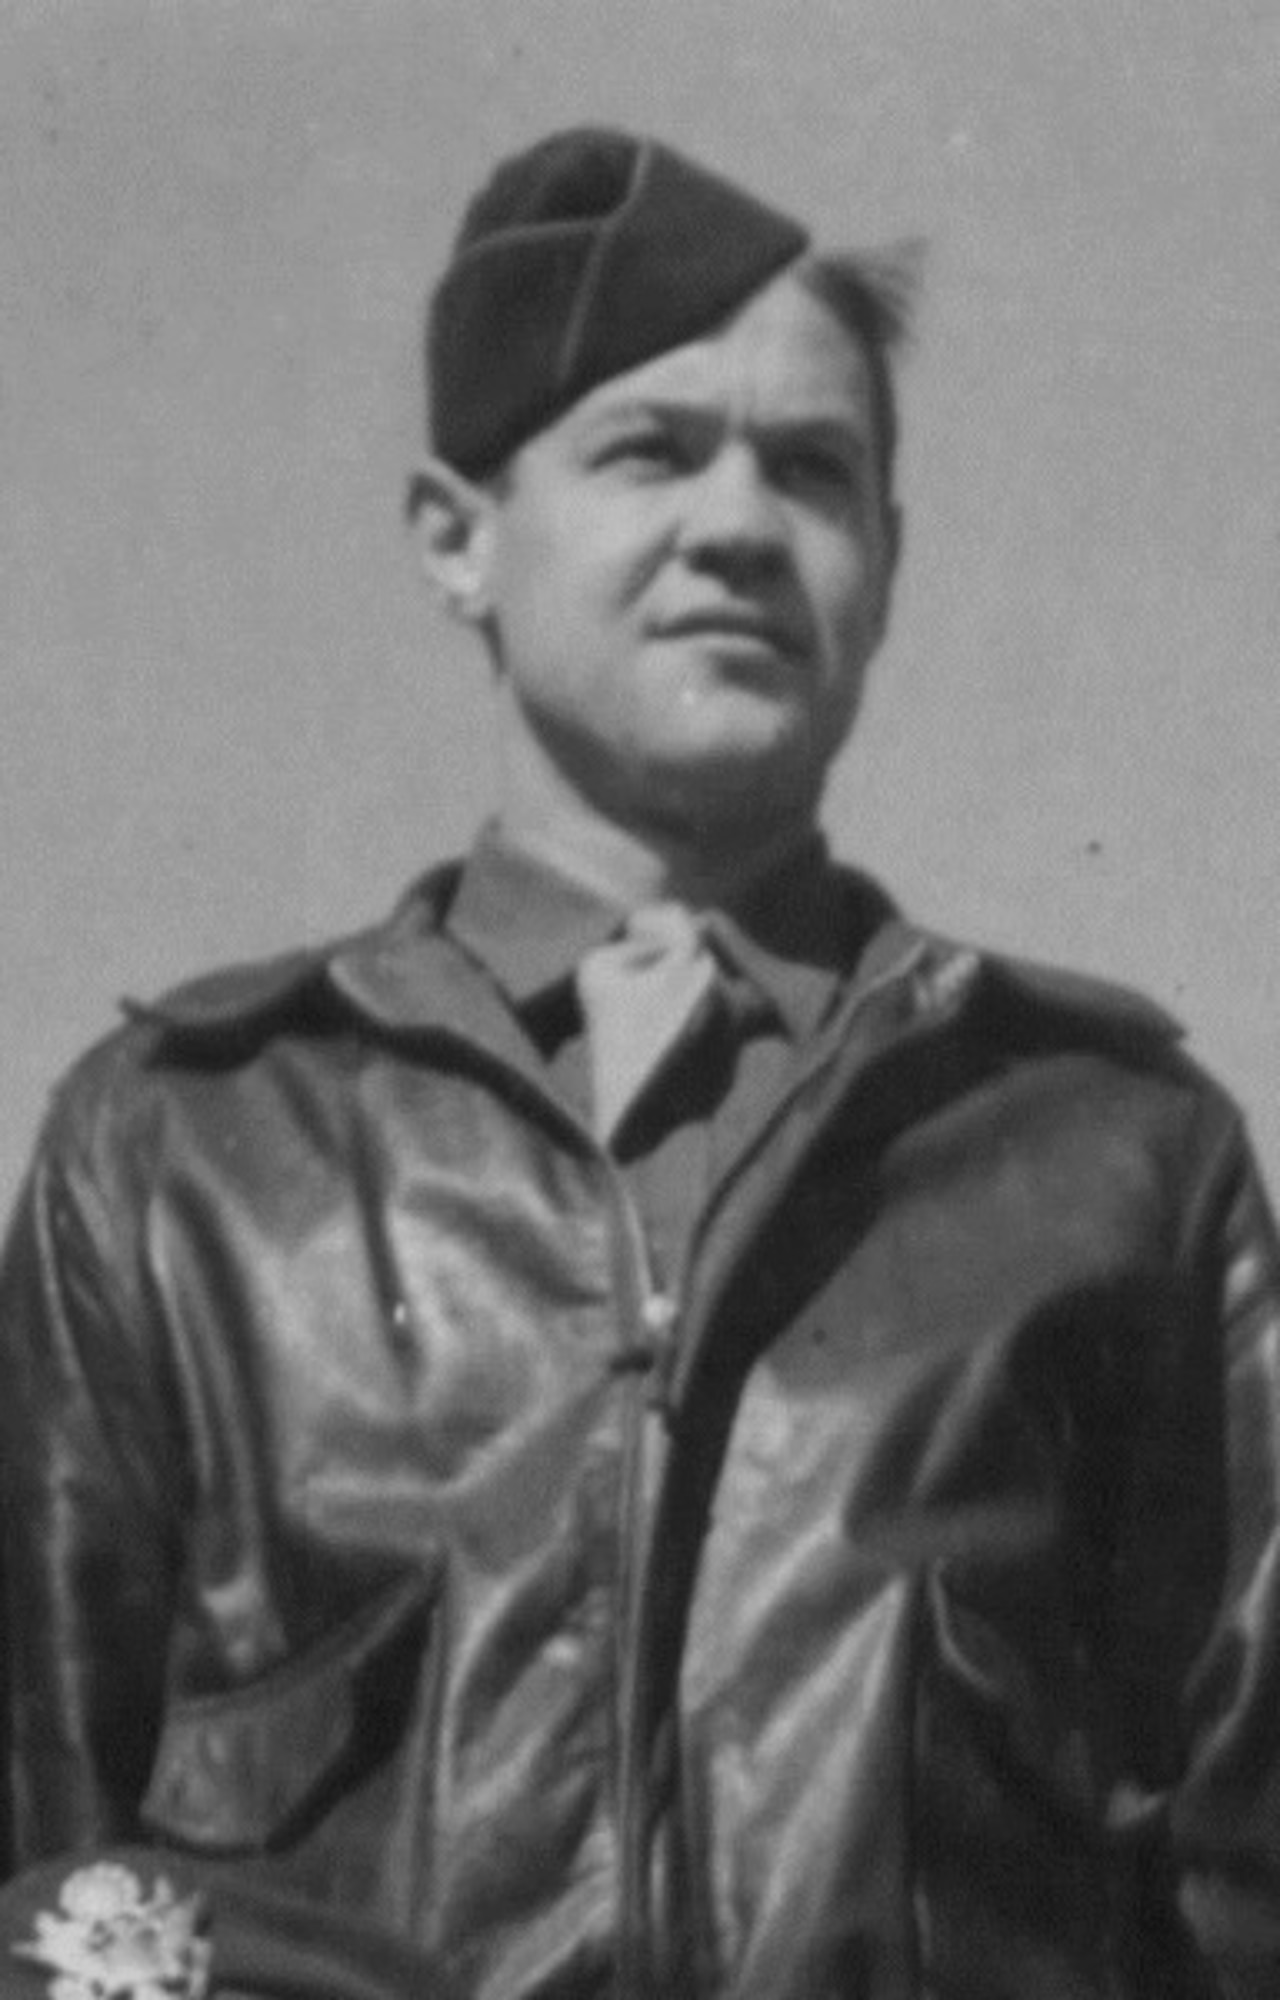 Sgt. John H. Pear was an original member of Oregon’s first aviation unit, the 123rd Observation squadron.  He later served as an aerial gunner in the 401st Bomb Group (H) and completed 30 combat missions in 1944.  (Courtesy 401st Bomb Group (H) Association)